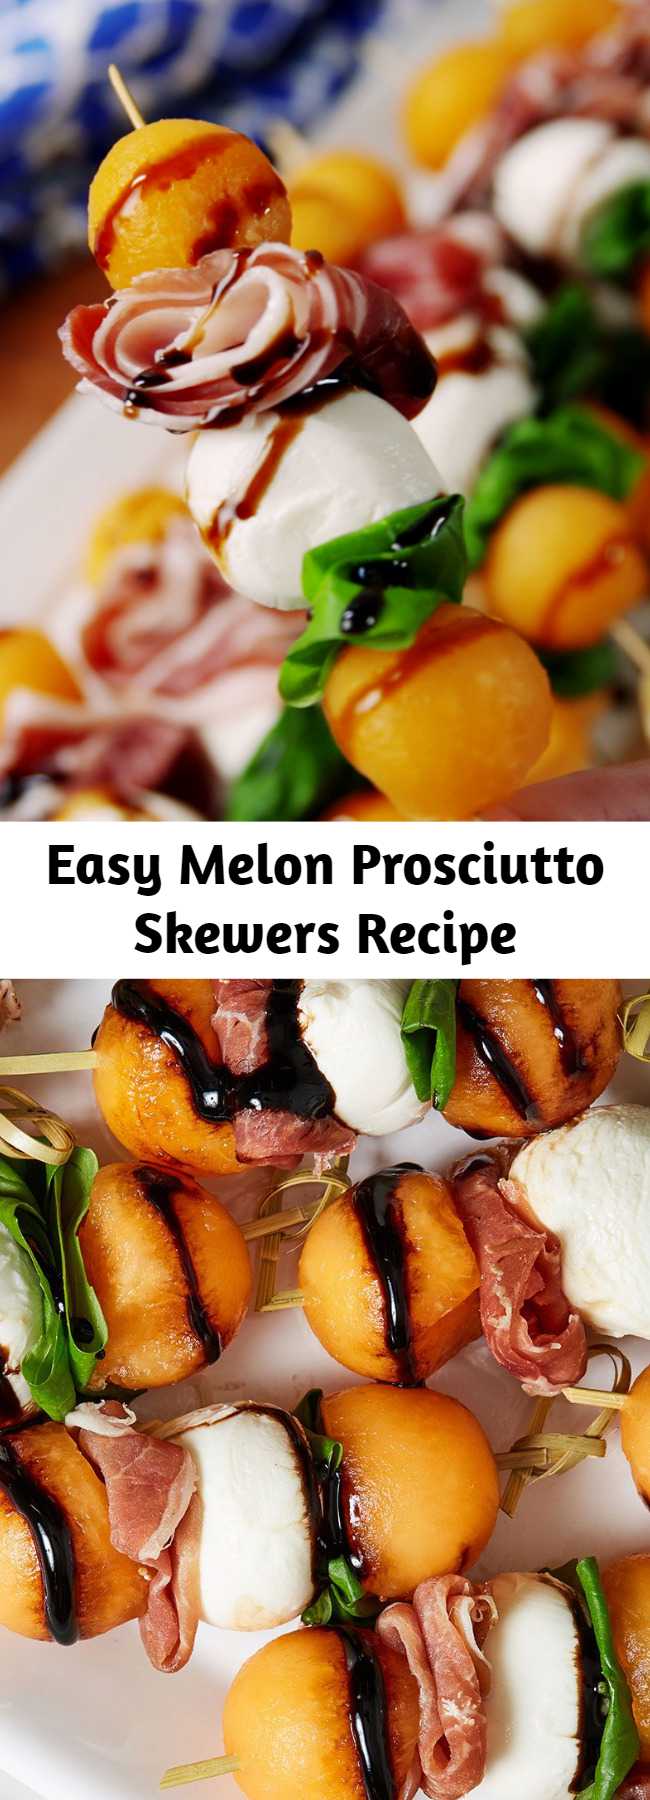 Easy Melon Prosciutto Skewers Recipe - These *classy* skewers are the easy summer app you've been searching for. The classic sweet and salty combination of cantaloupe and prosciutto will never go out of style. The addition of fresh basil and creamy mozzarella makes a good thing even better. If you're feeling fancy, make the balsamic glaze from scratch!